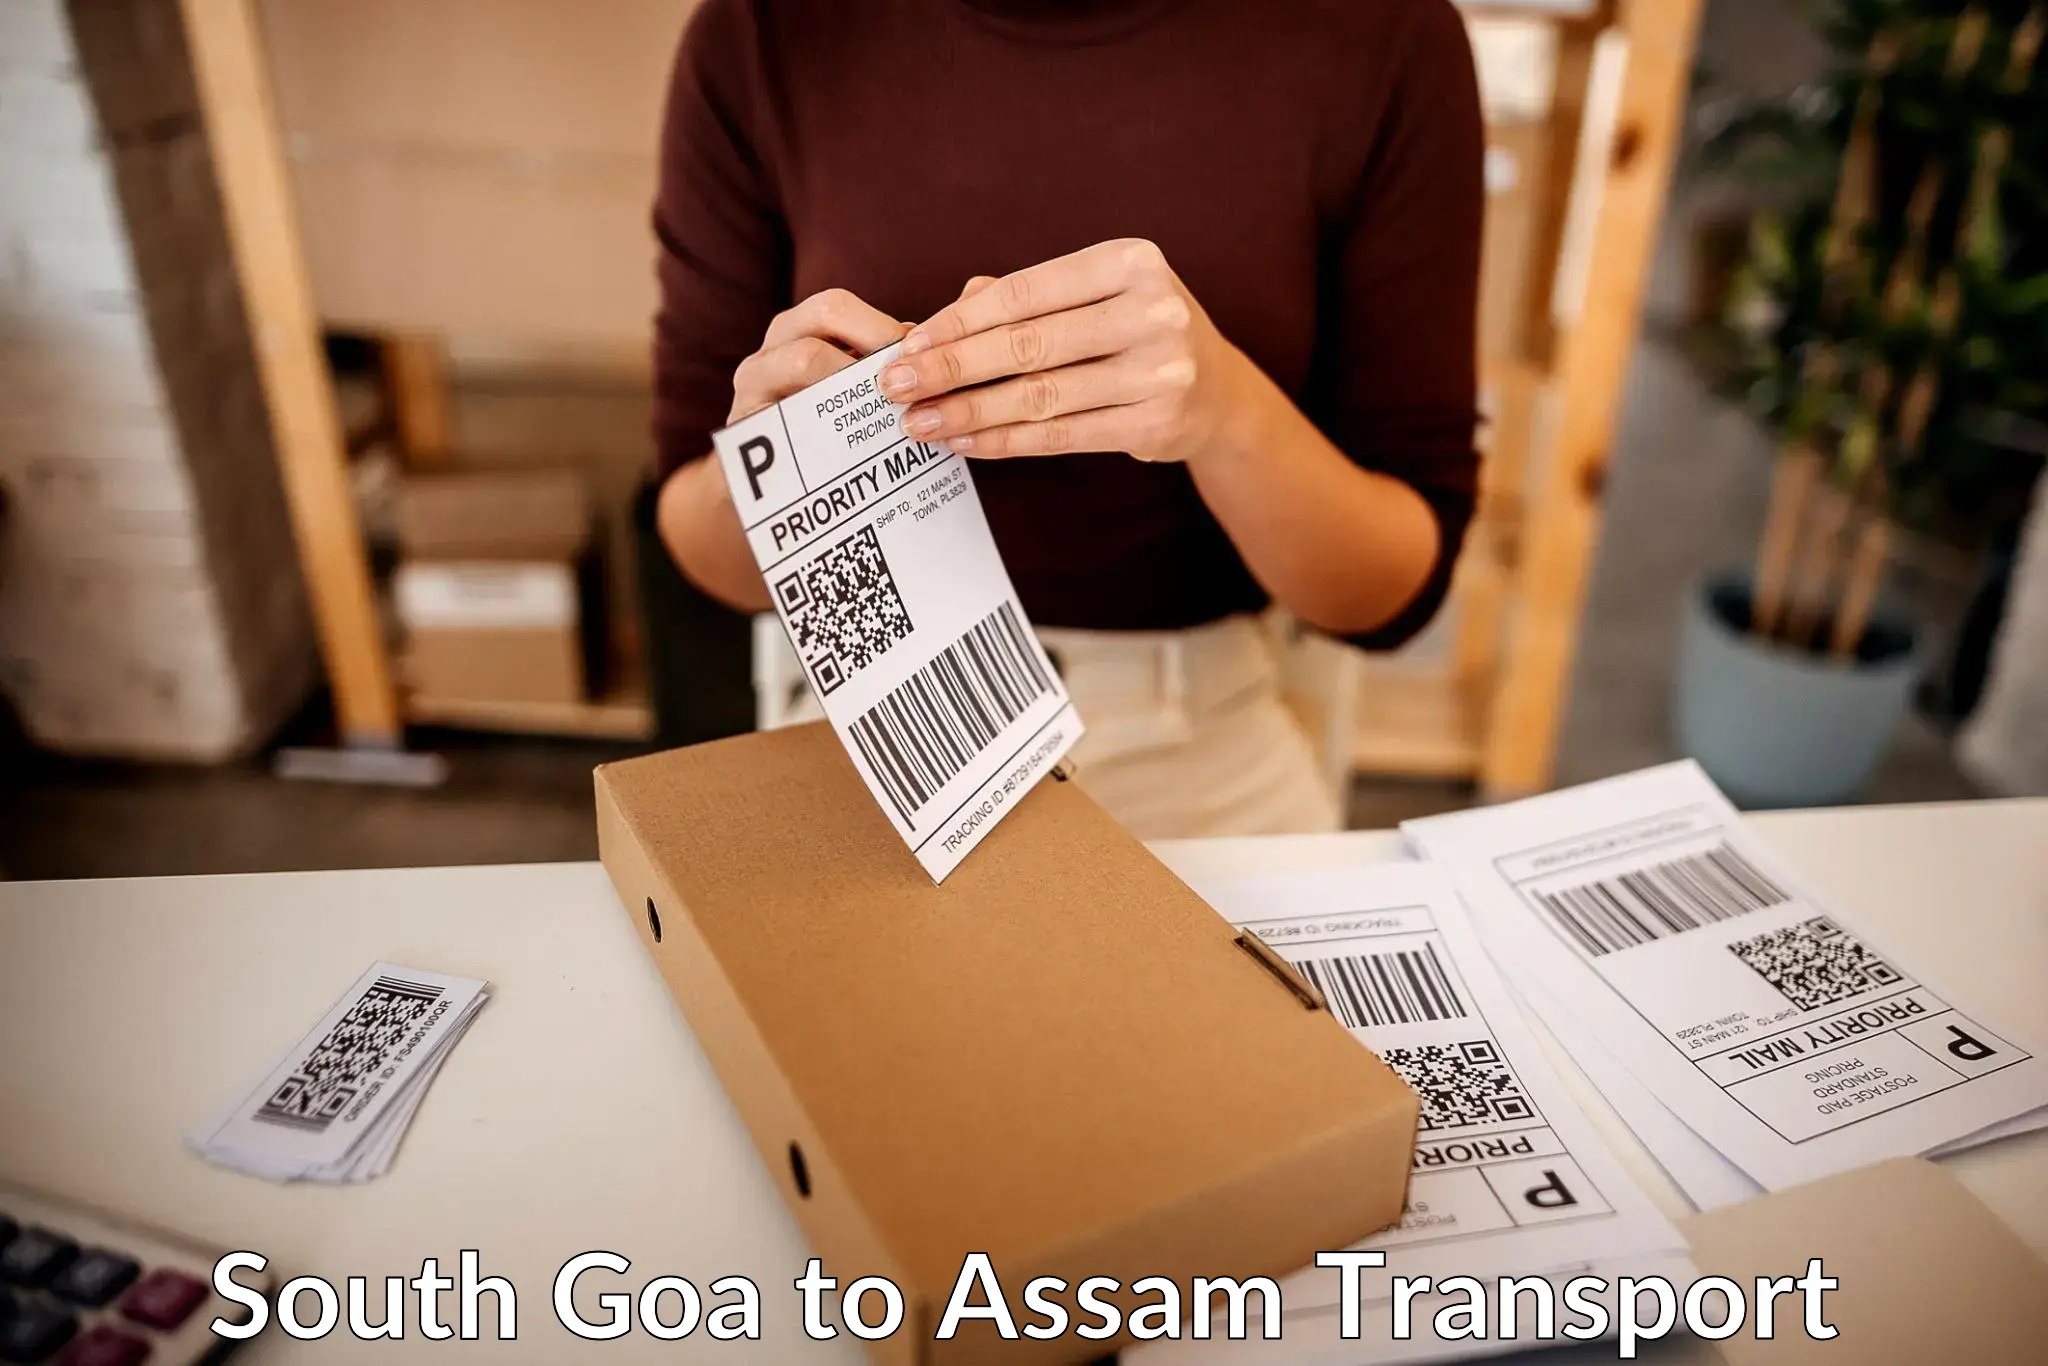 Delivery service South Goa to Guwahati